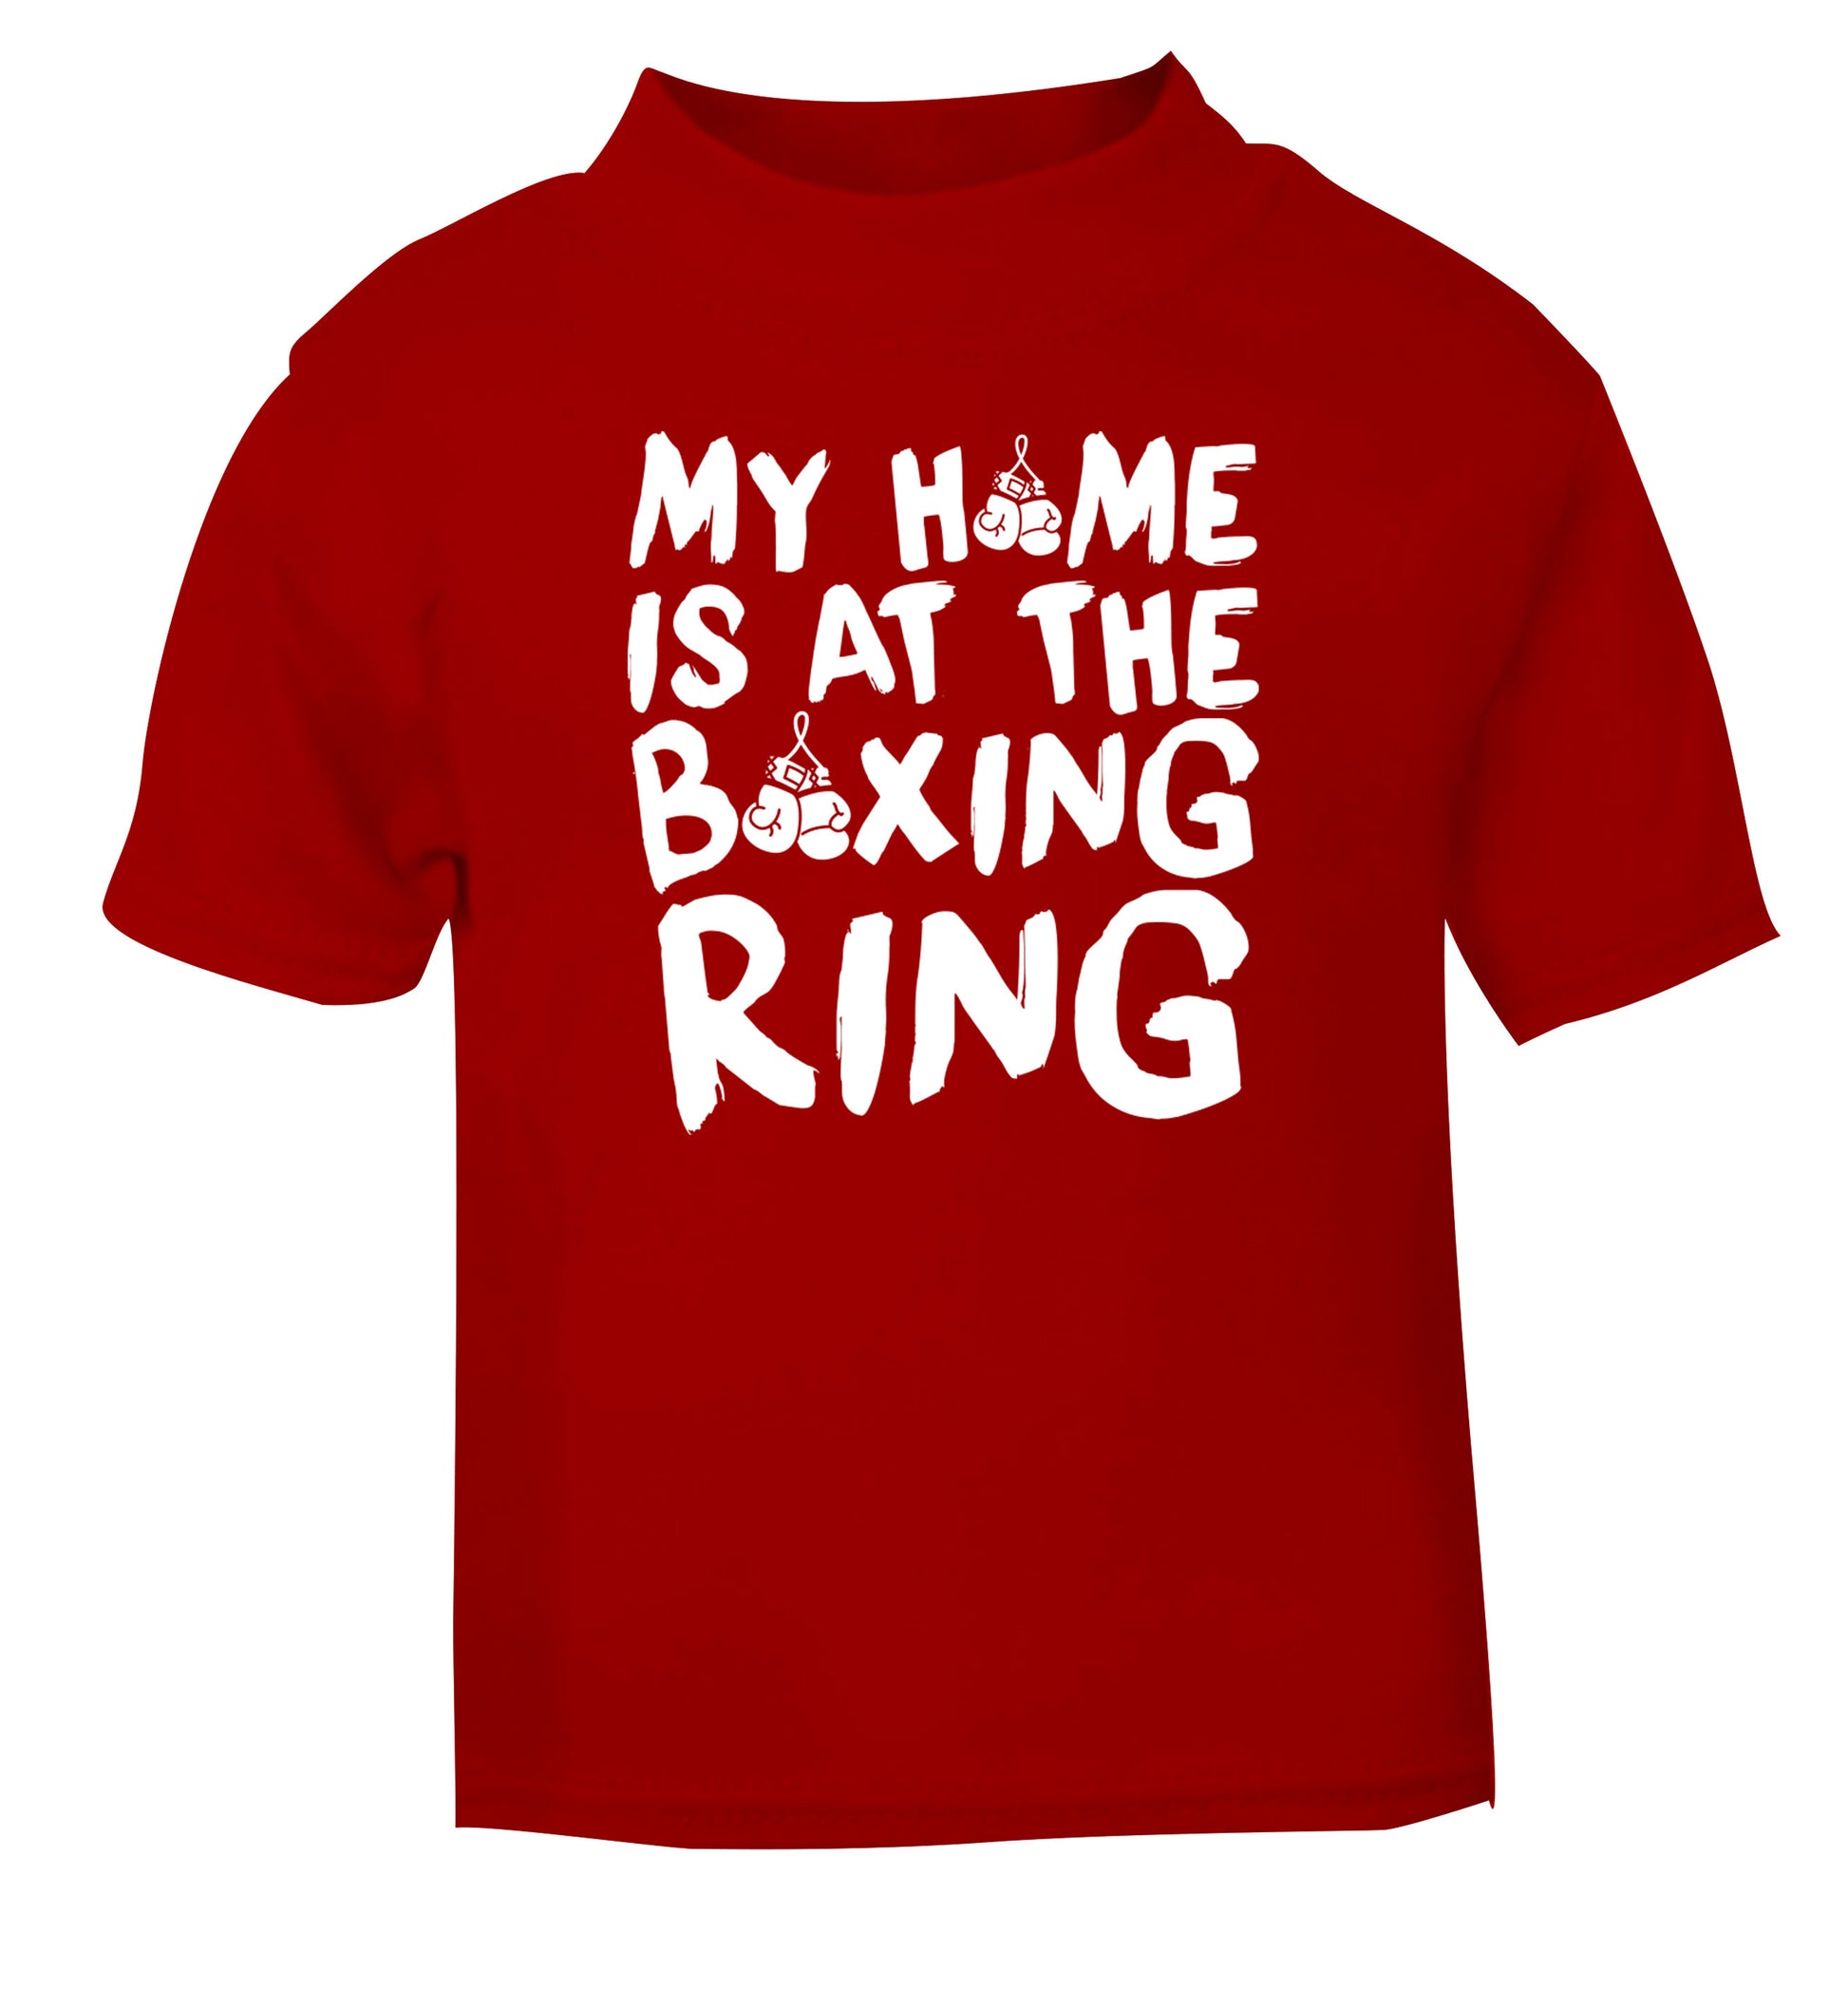 My home is at the boxing ring red Baby Toddler Tshirt 2 Years